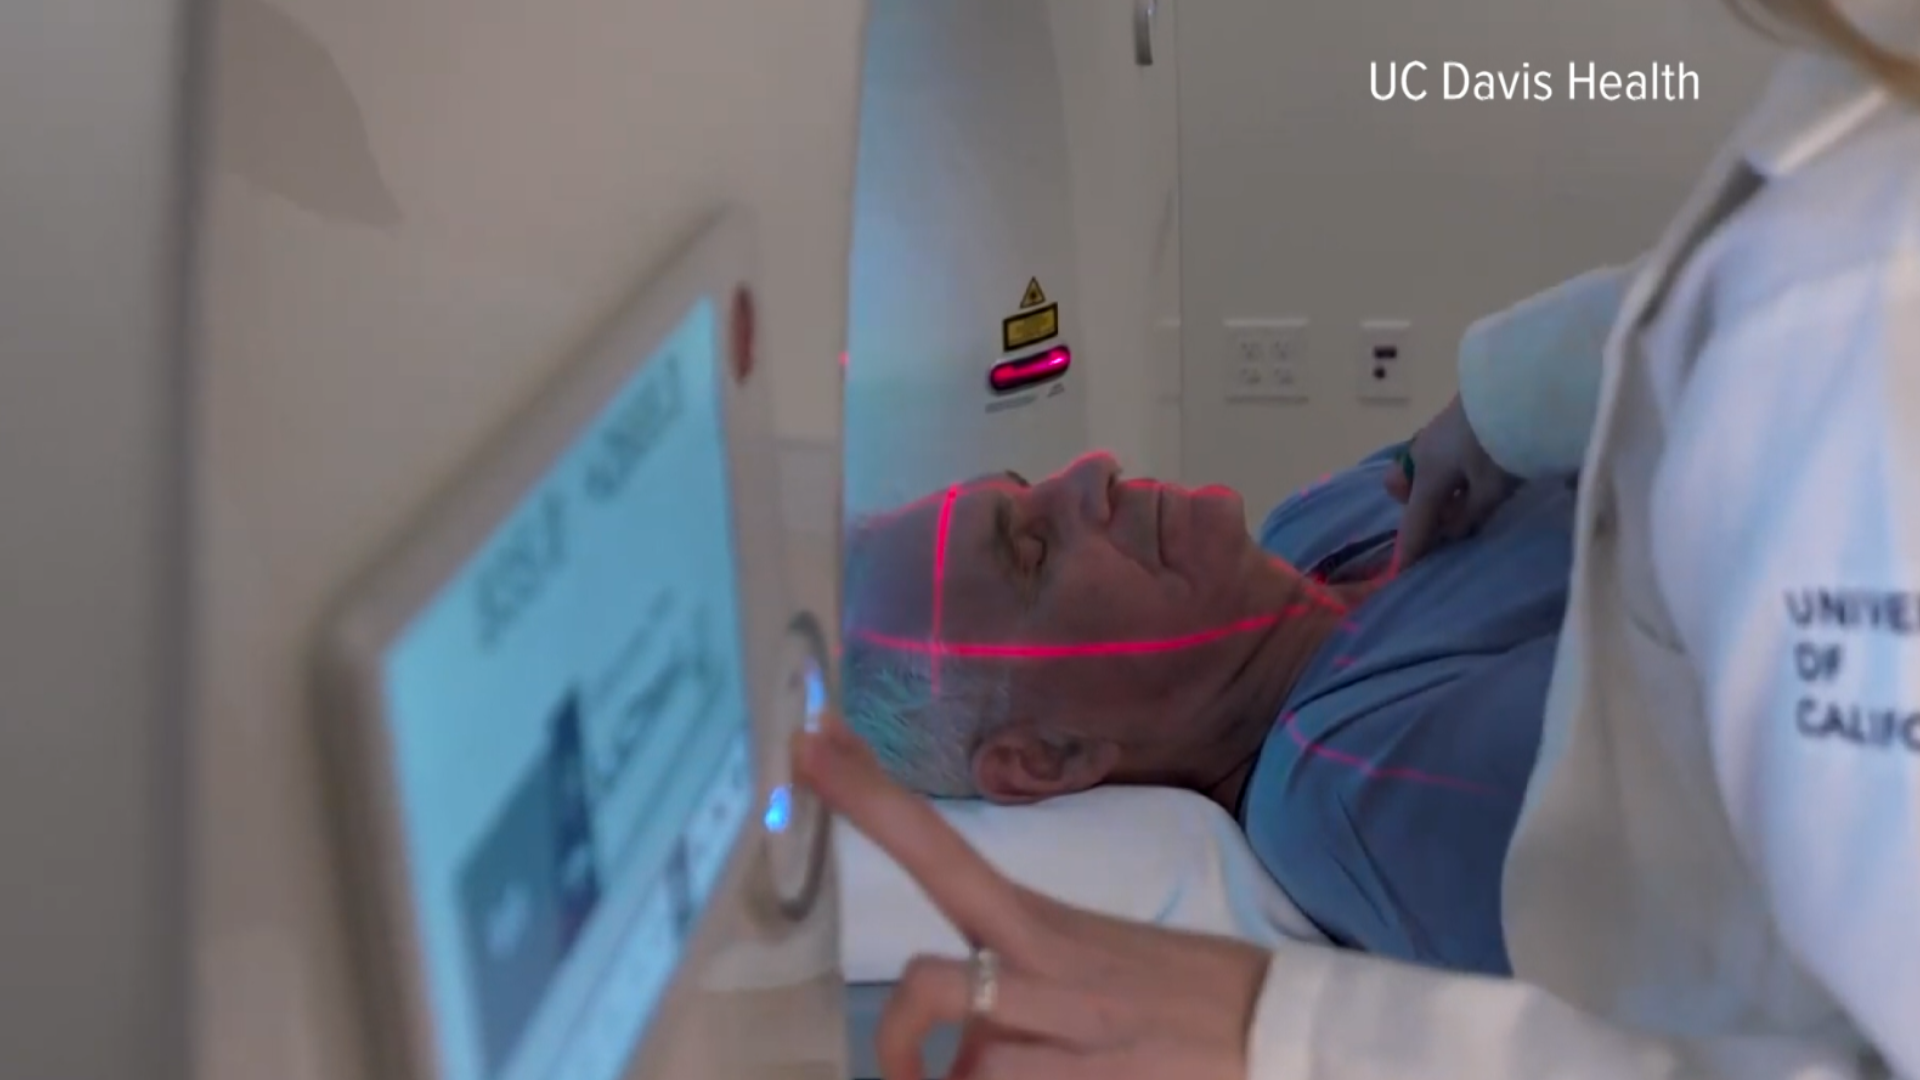 UC Davis Health created the first full body PET scanner in the world. Now they need people from various ethnic backgrounds to volunteer for a scan.